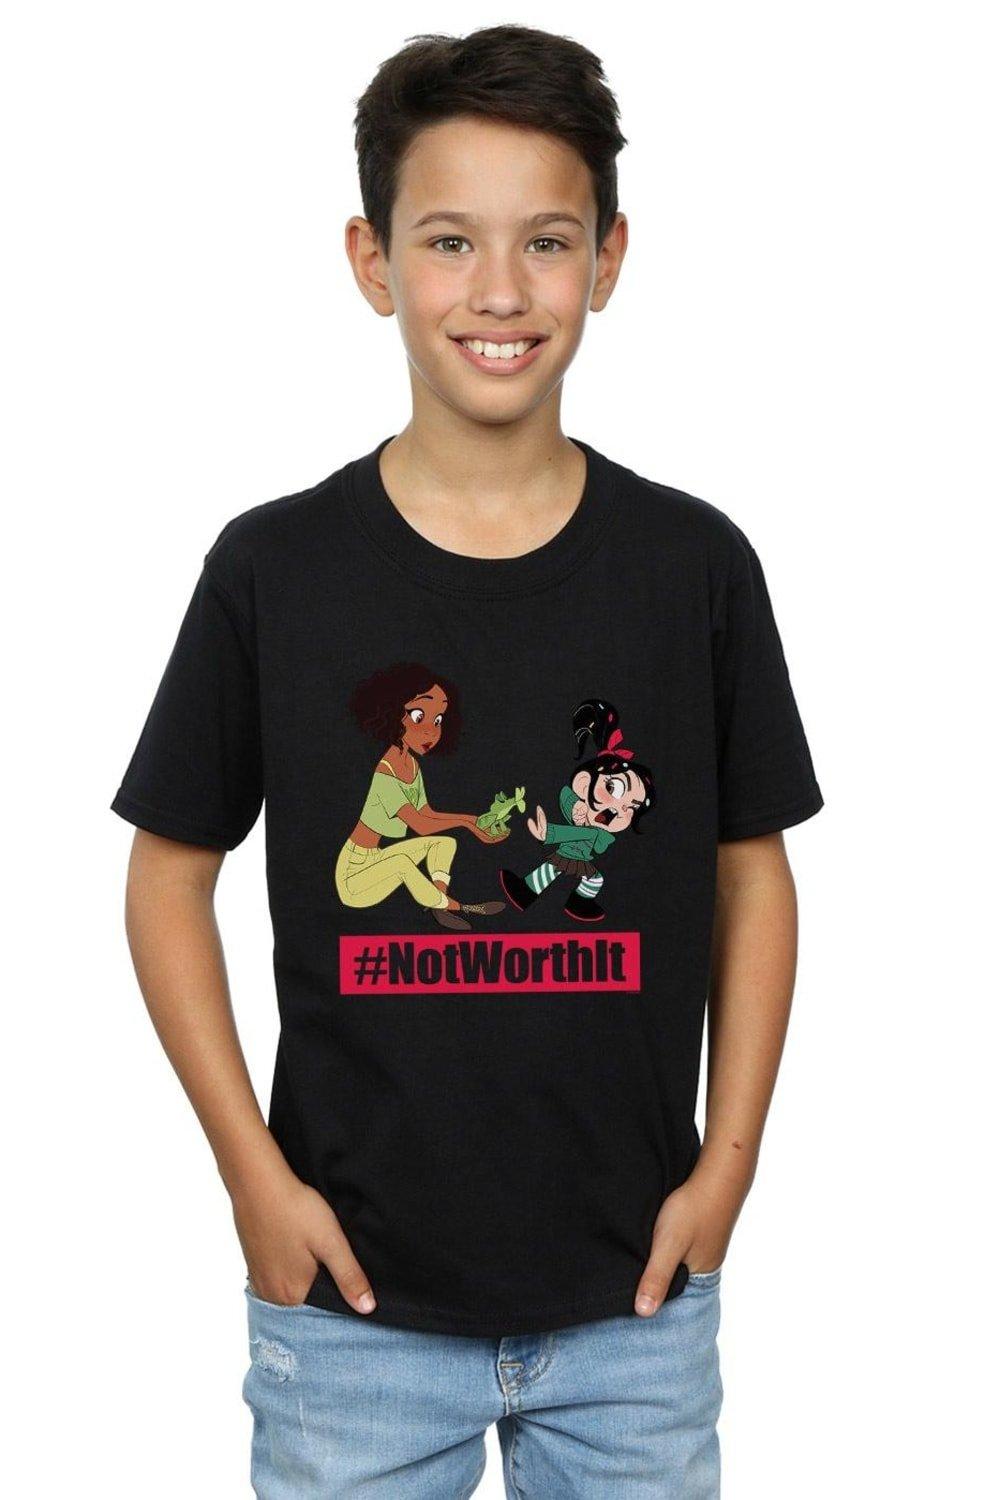 Wreck It Ralph Tiana And Vanellope T-Shirt